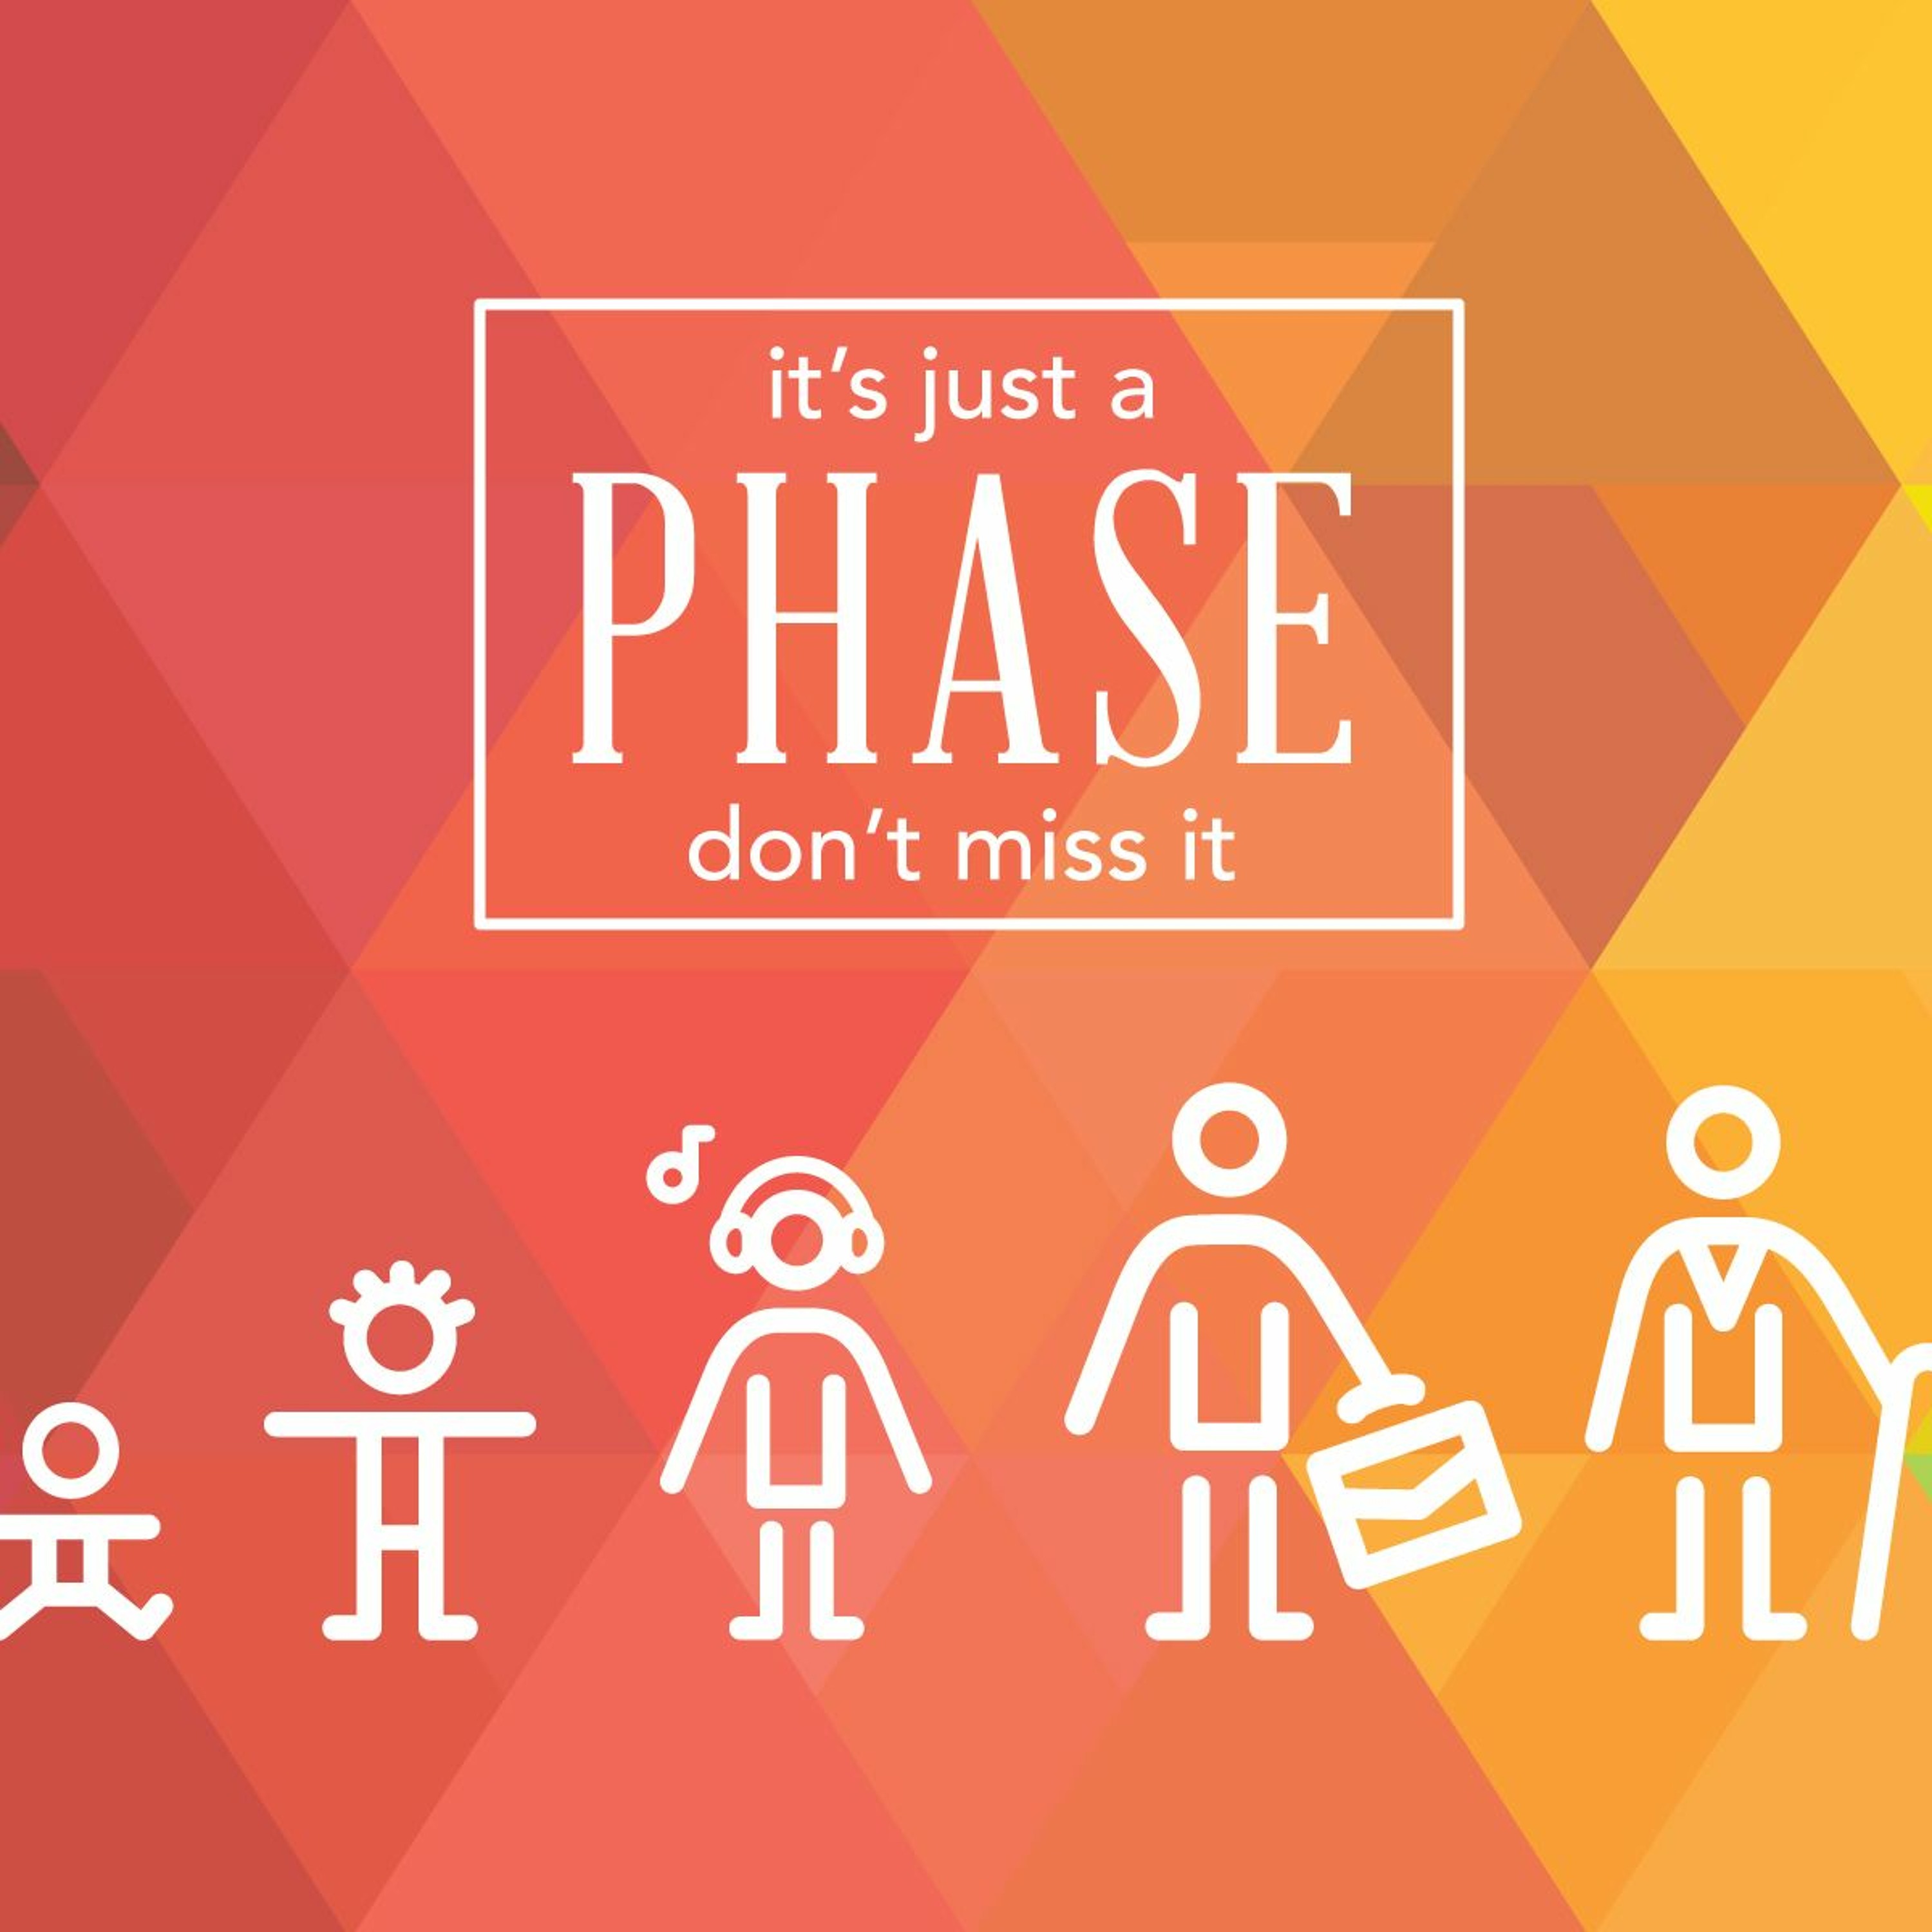 Failure and disappointment | It’s Just a Phase | Ethan Magness